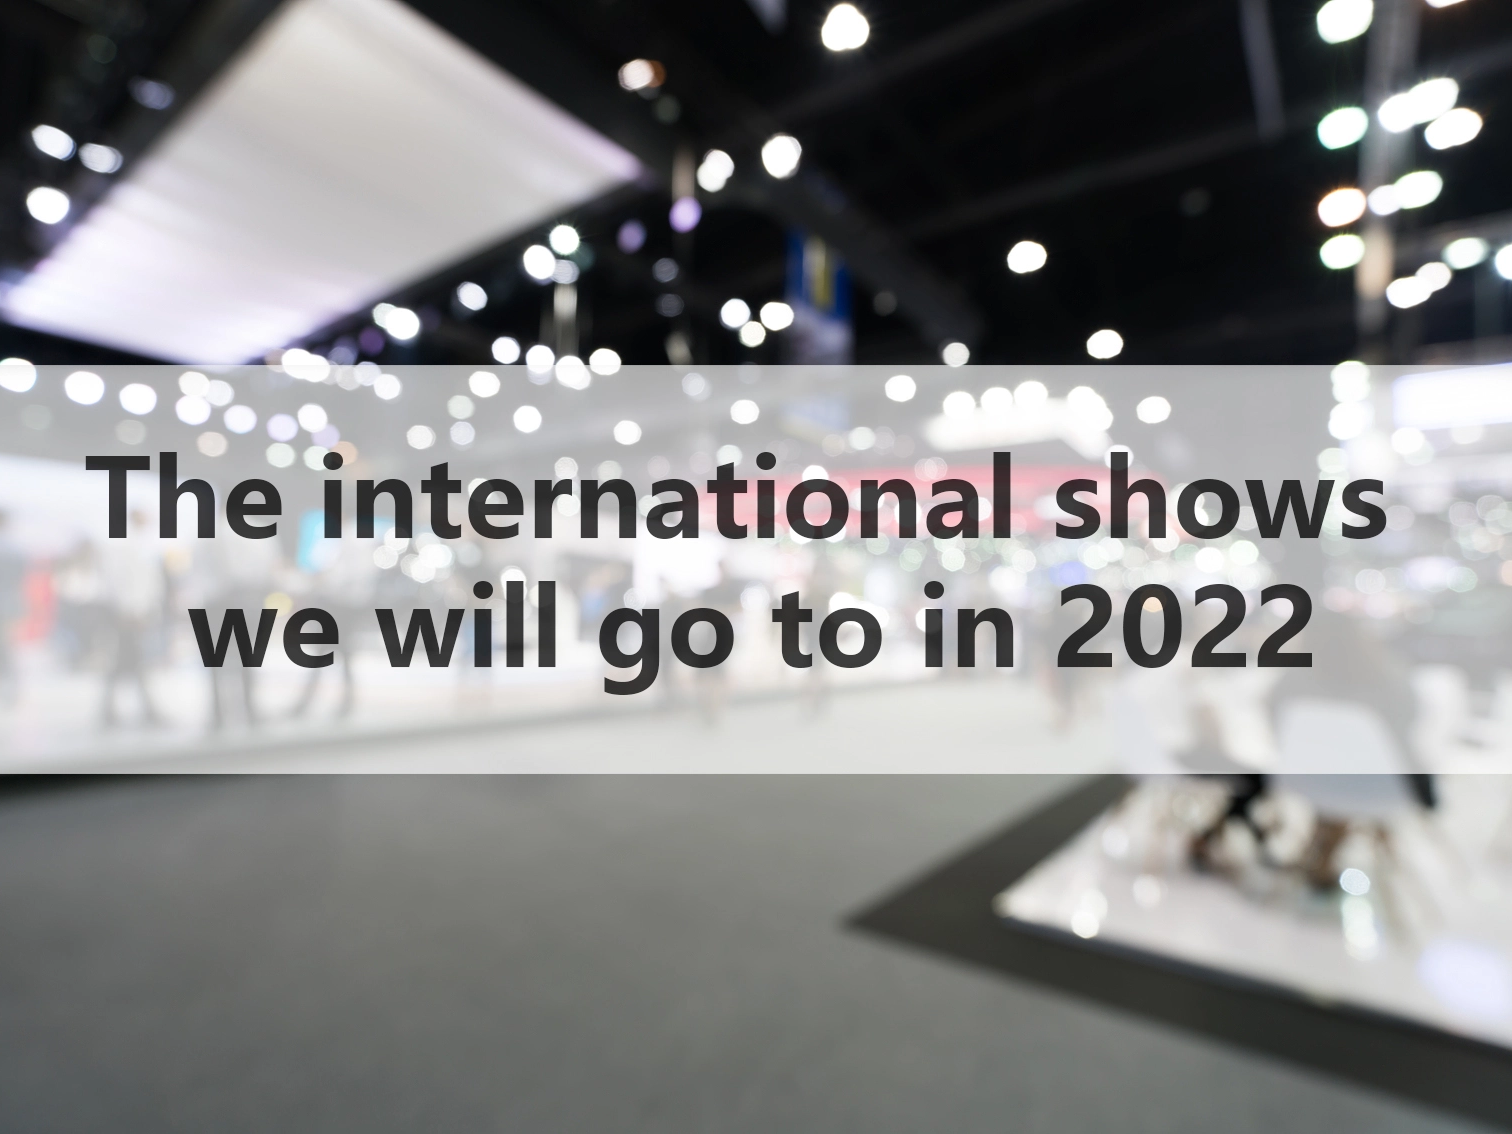 The international shows we will go to in 2022